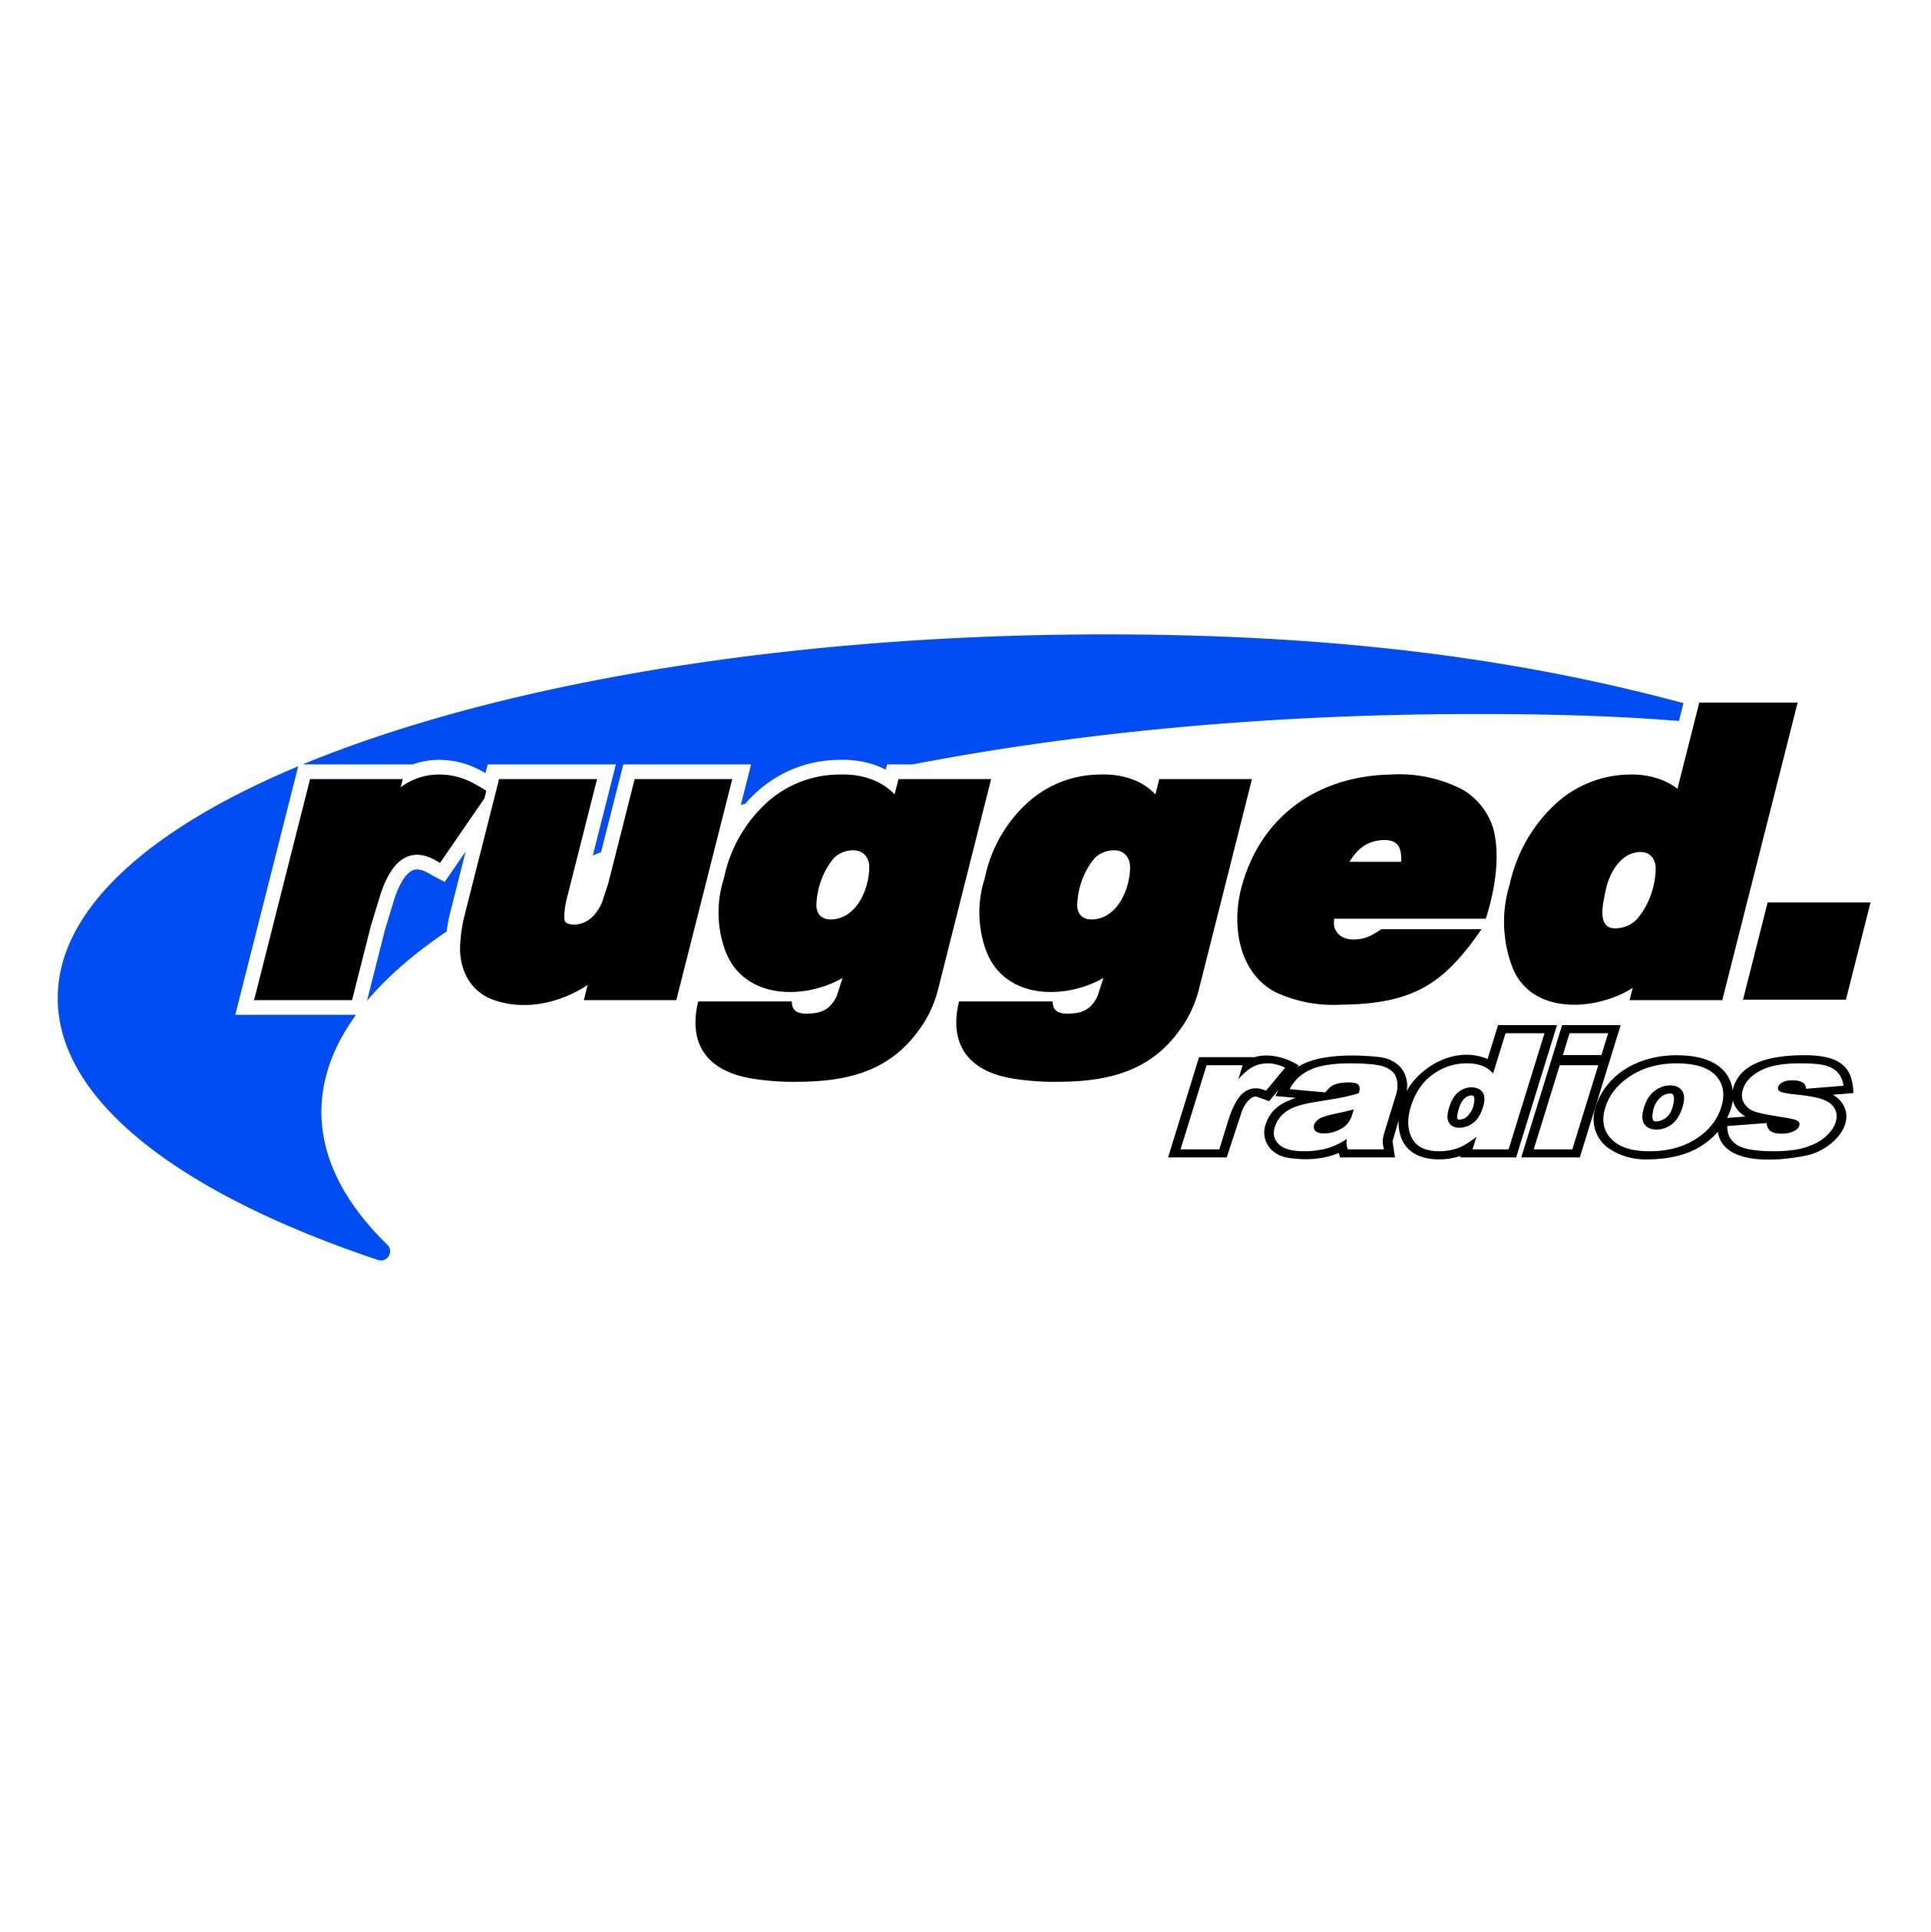 Rugged Radios Die Cut Stickers - Available In A Variety of Sizes